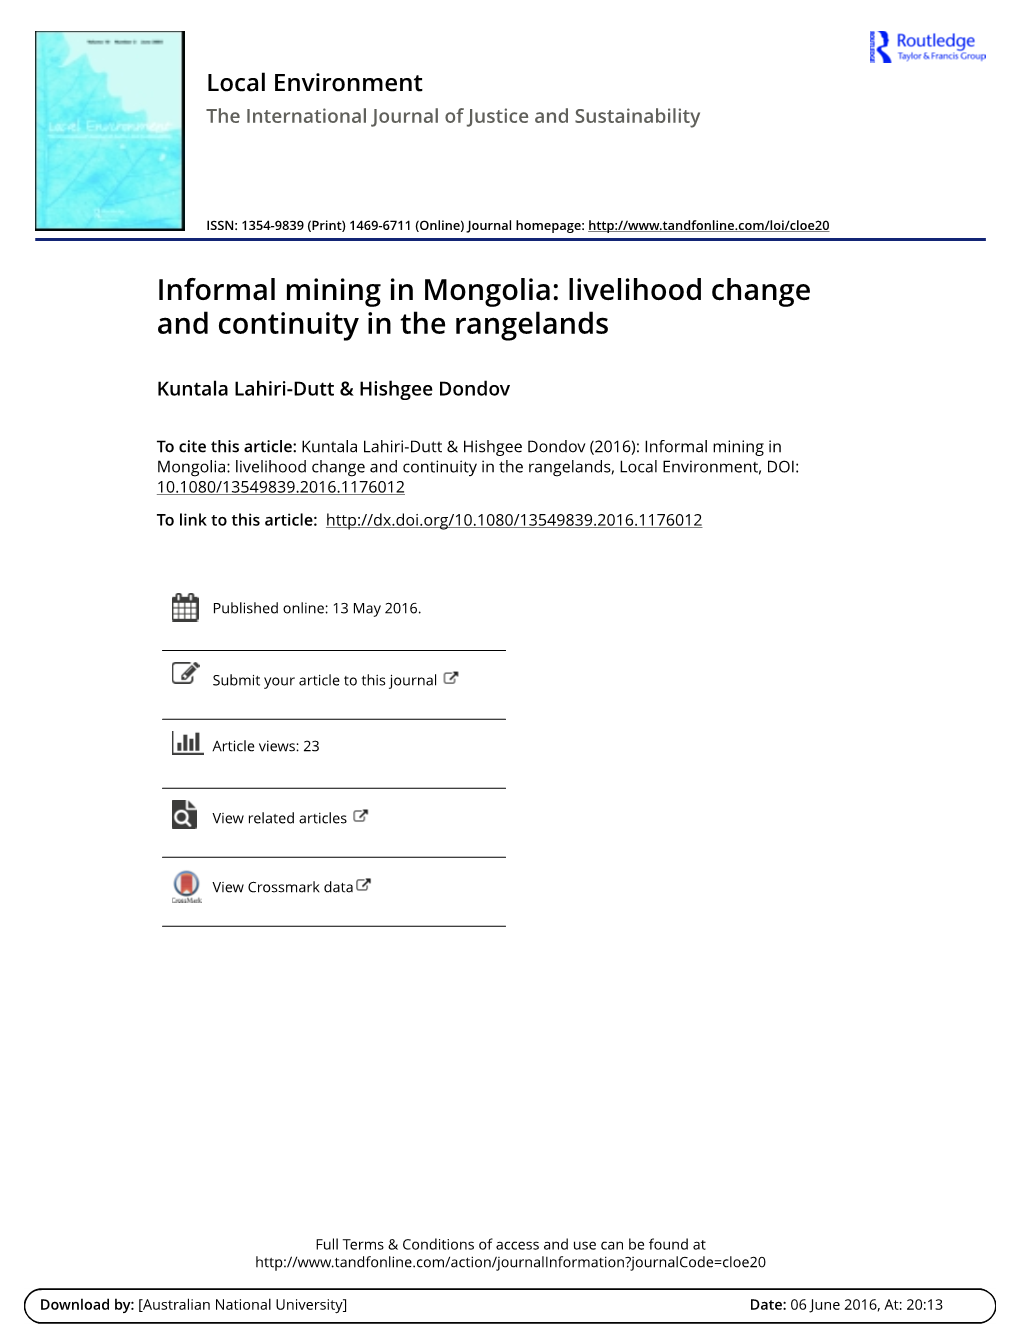 Informal Mining in Mongolia: Livelihood Change and Continuity in the Rangelands